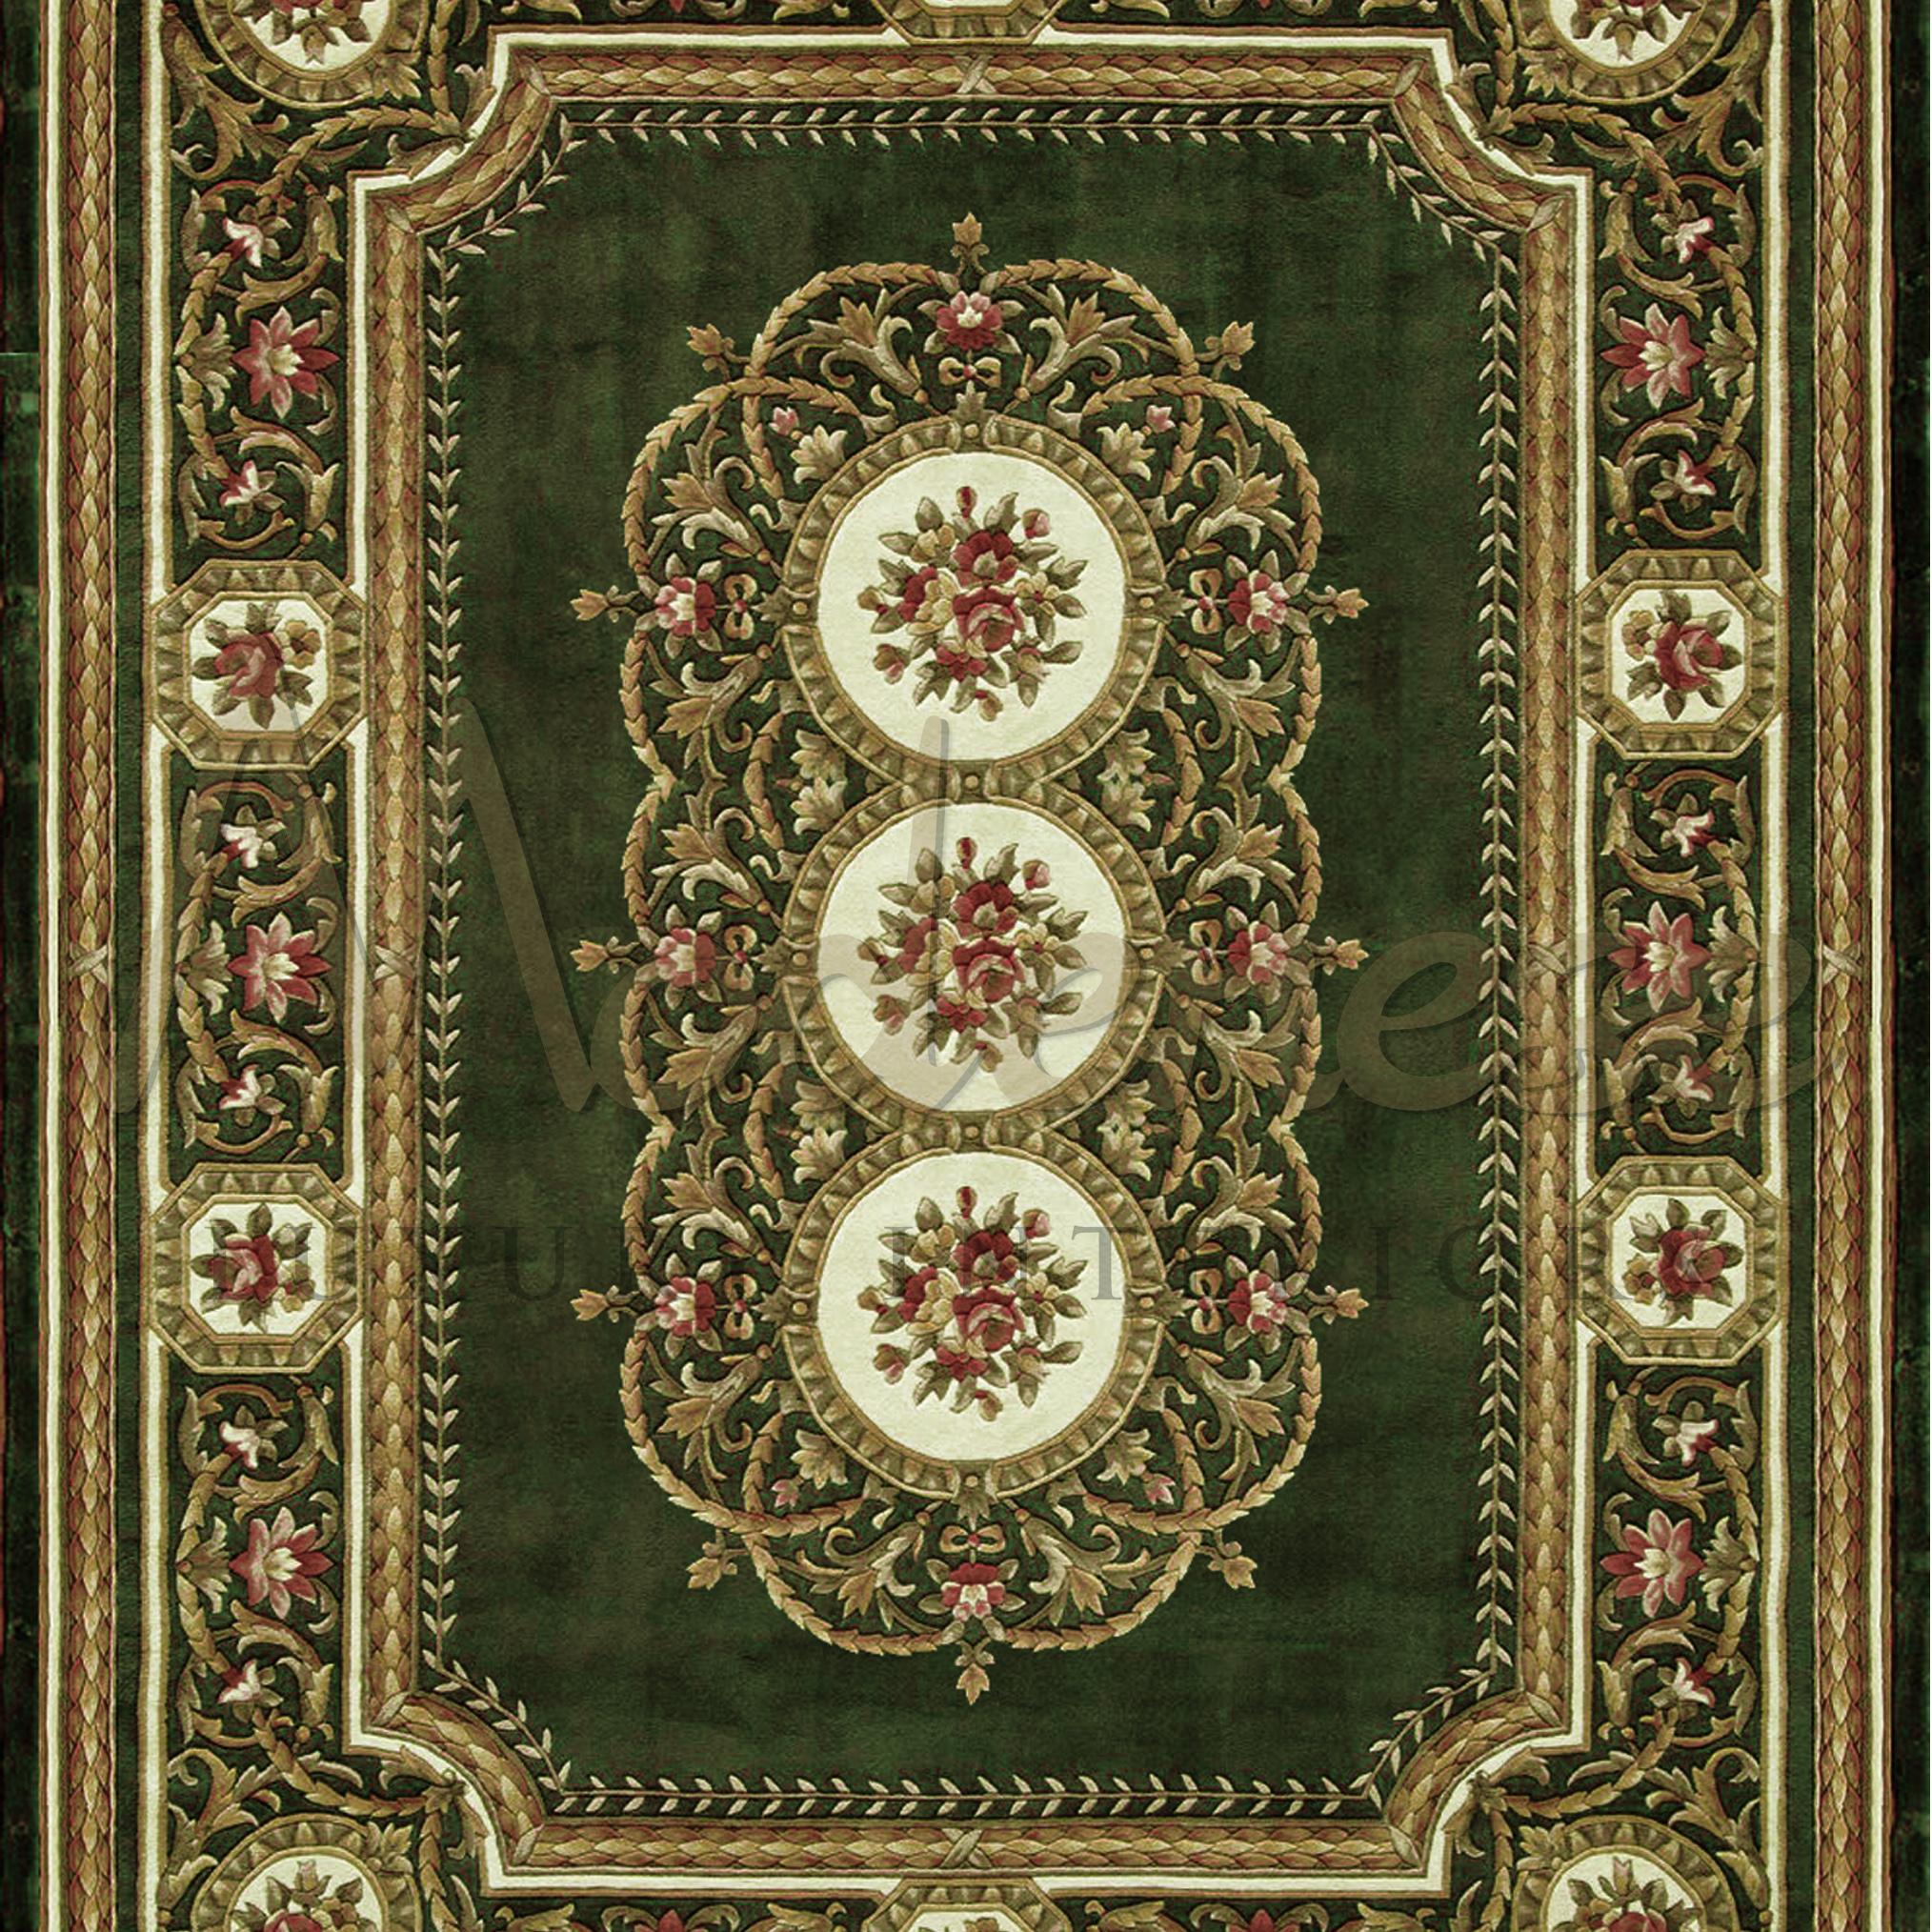 100% bamboo silk rug with emerald background and intricate floreal details. At its center, three wide circles with red roses. Modenese Interiors artisans preciously handbraided this priceless colorized vintage rug for a baroque penthouse interior